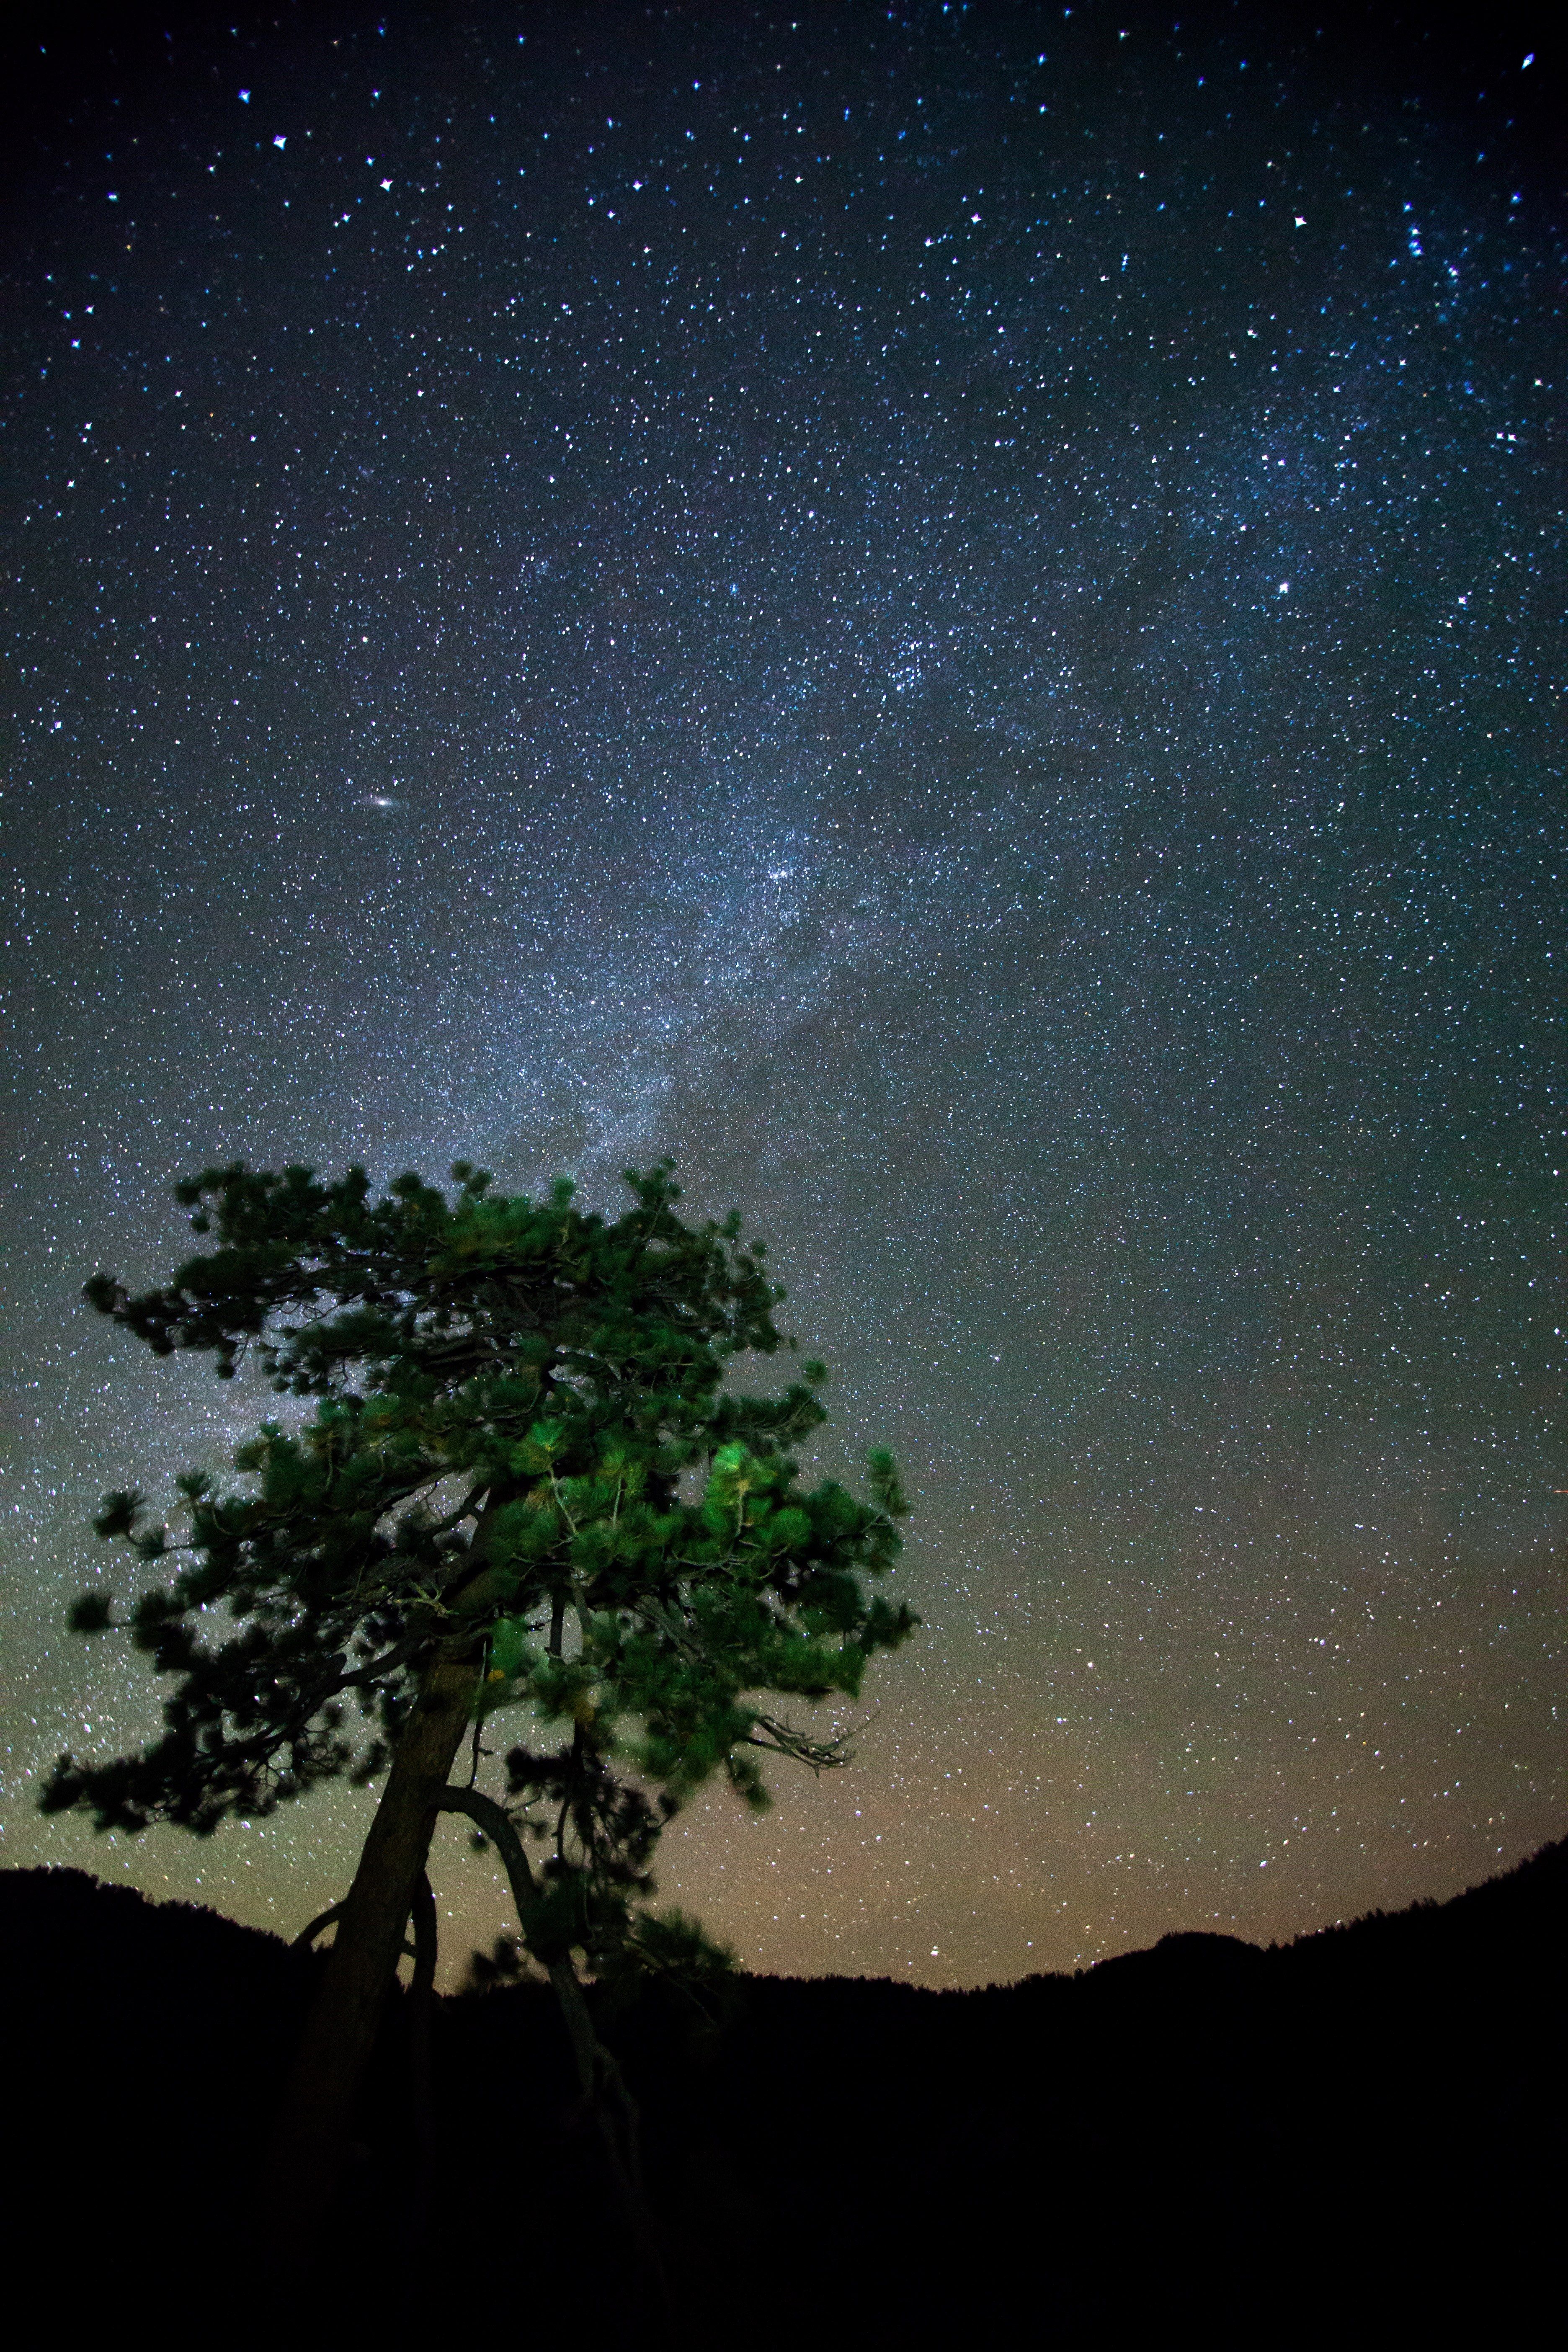 A tree is silhouetted against a starry sky. - Camping